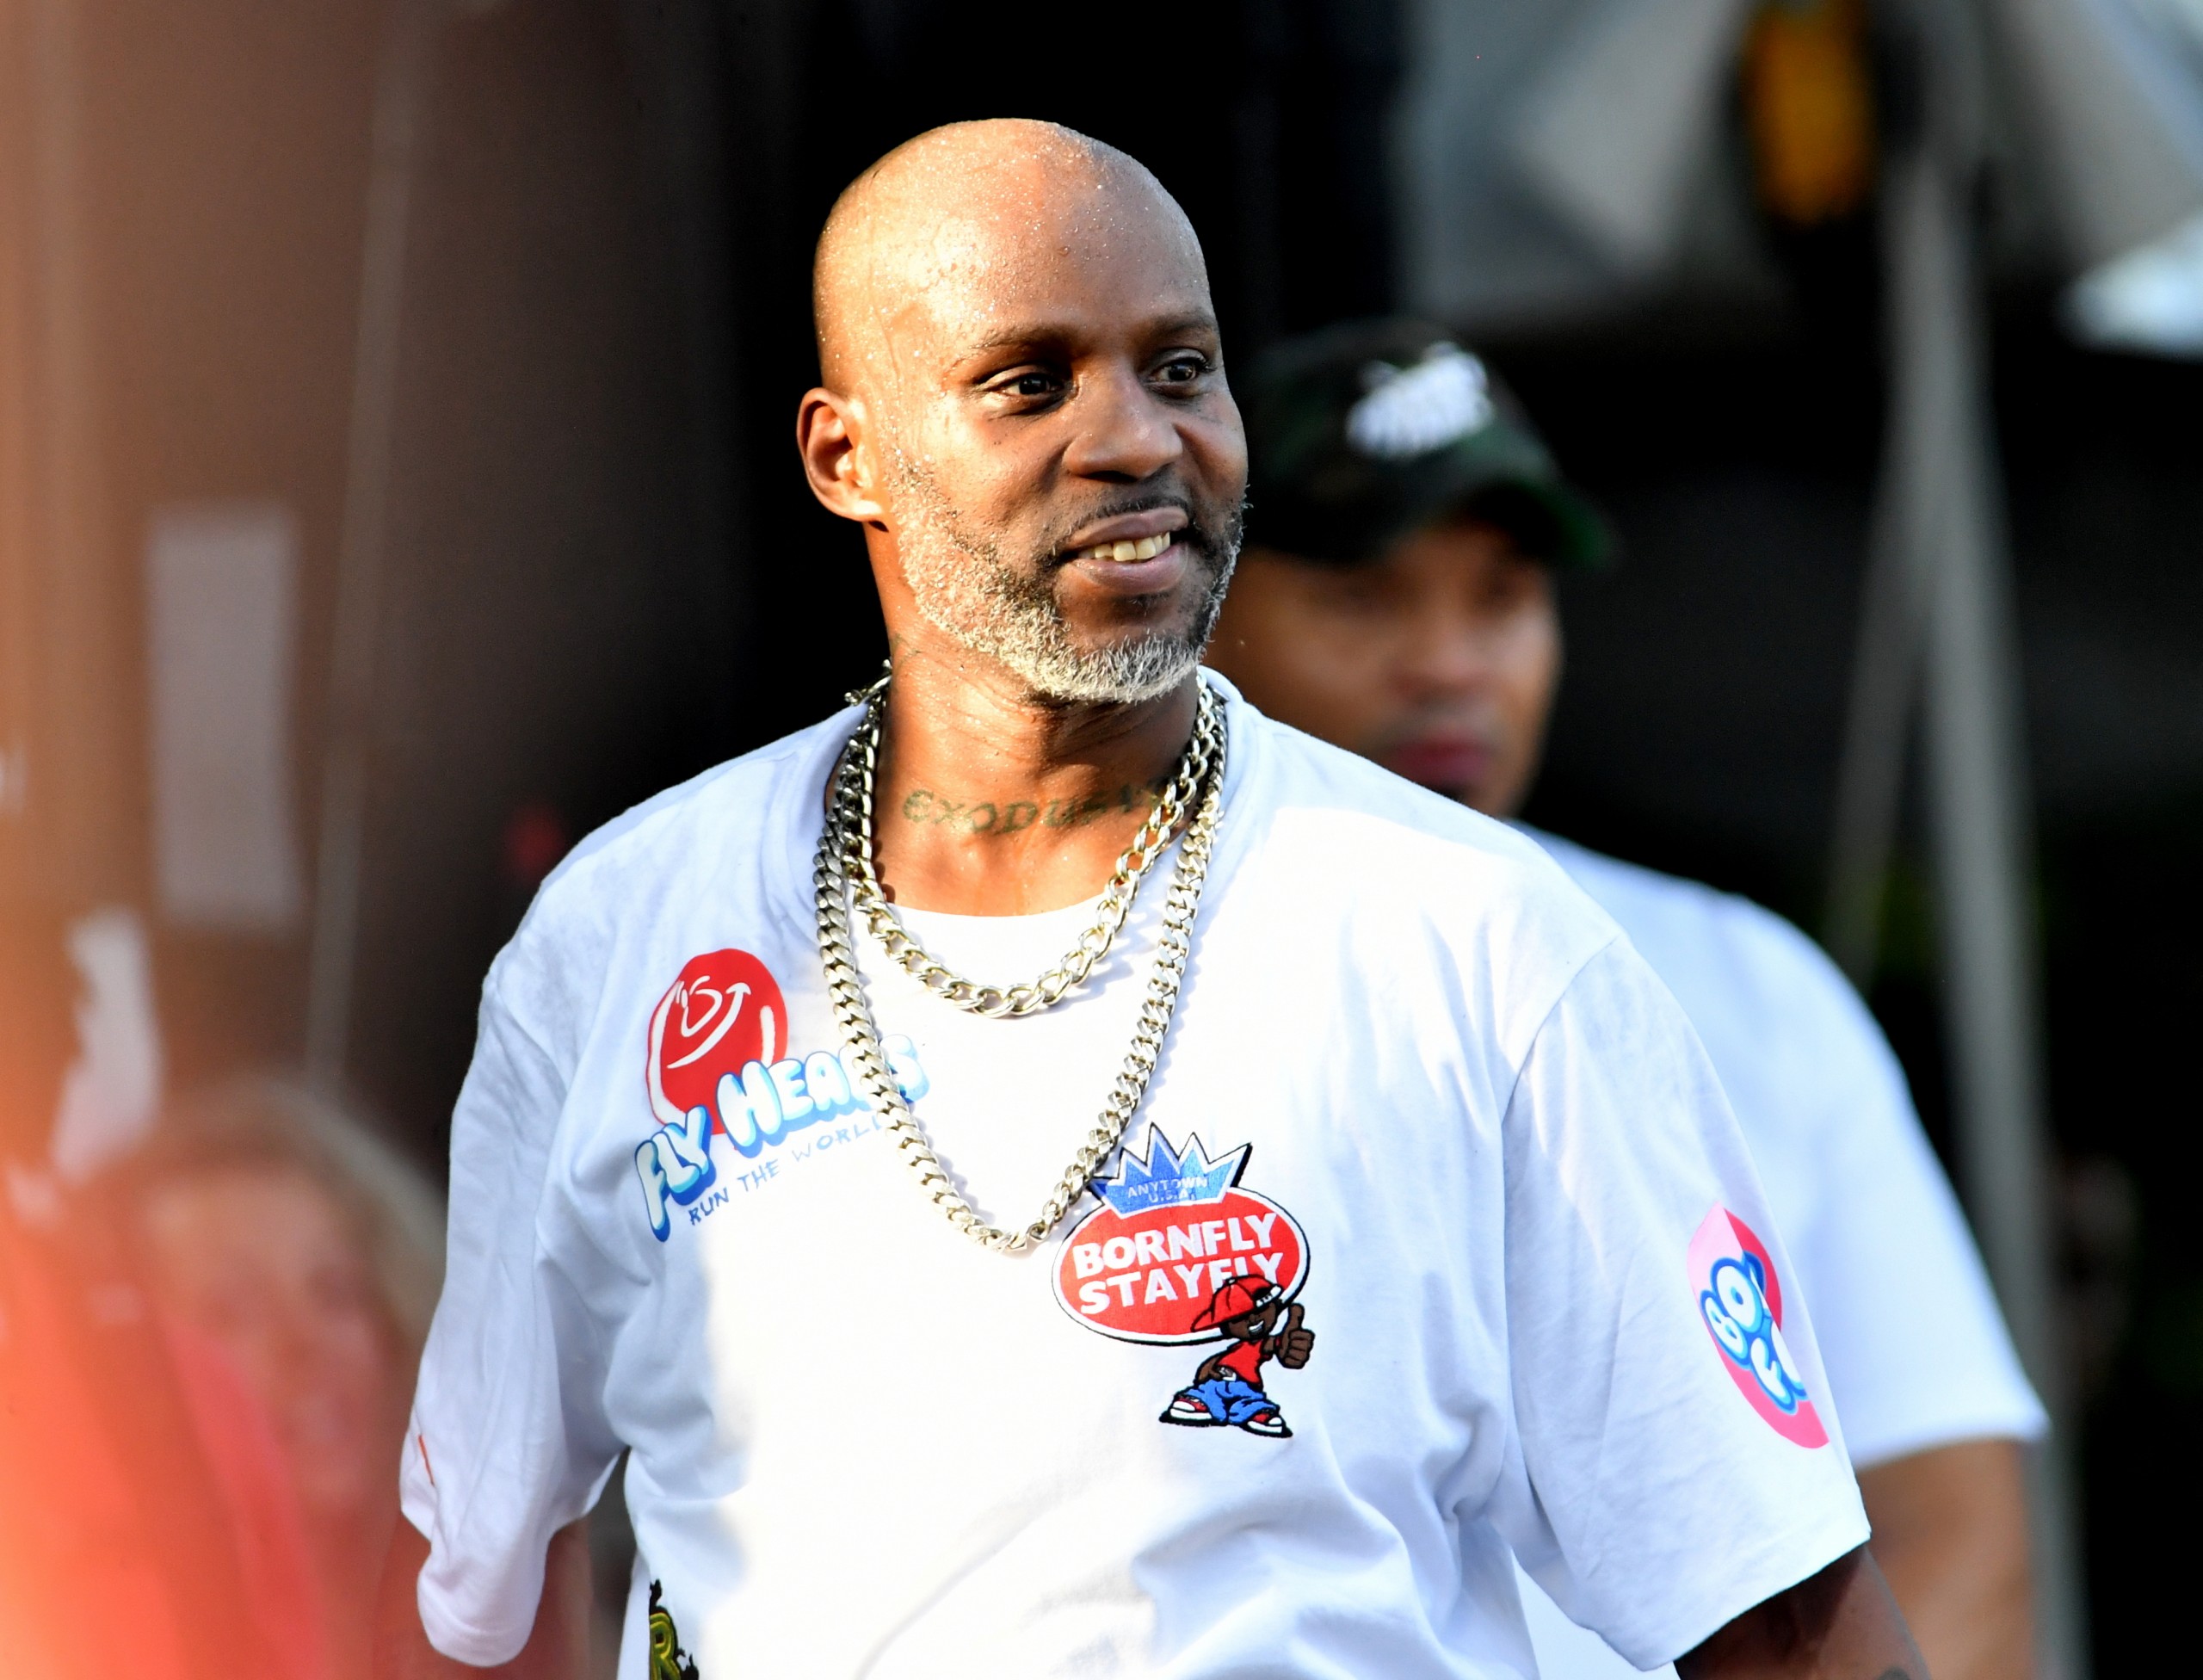 A Tribute To DMX, A One-Of-A-Kind Rap Star